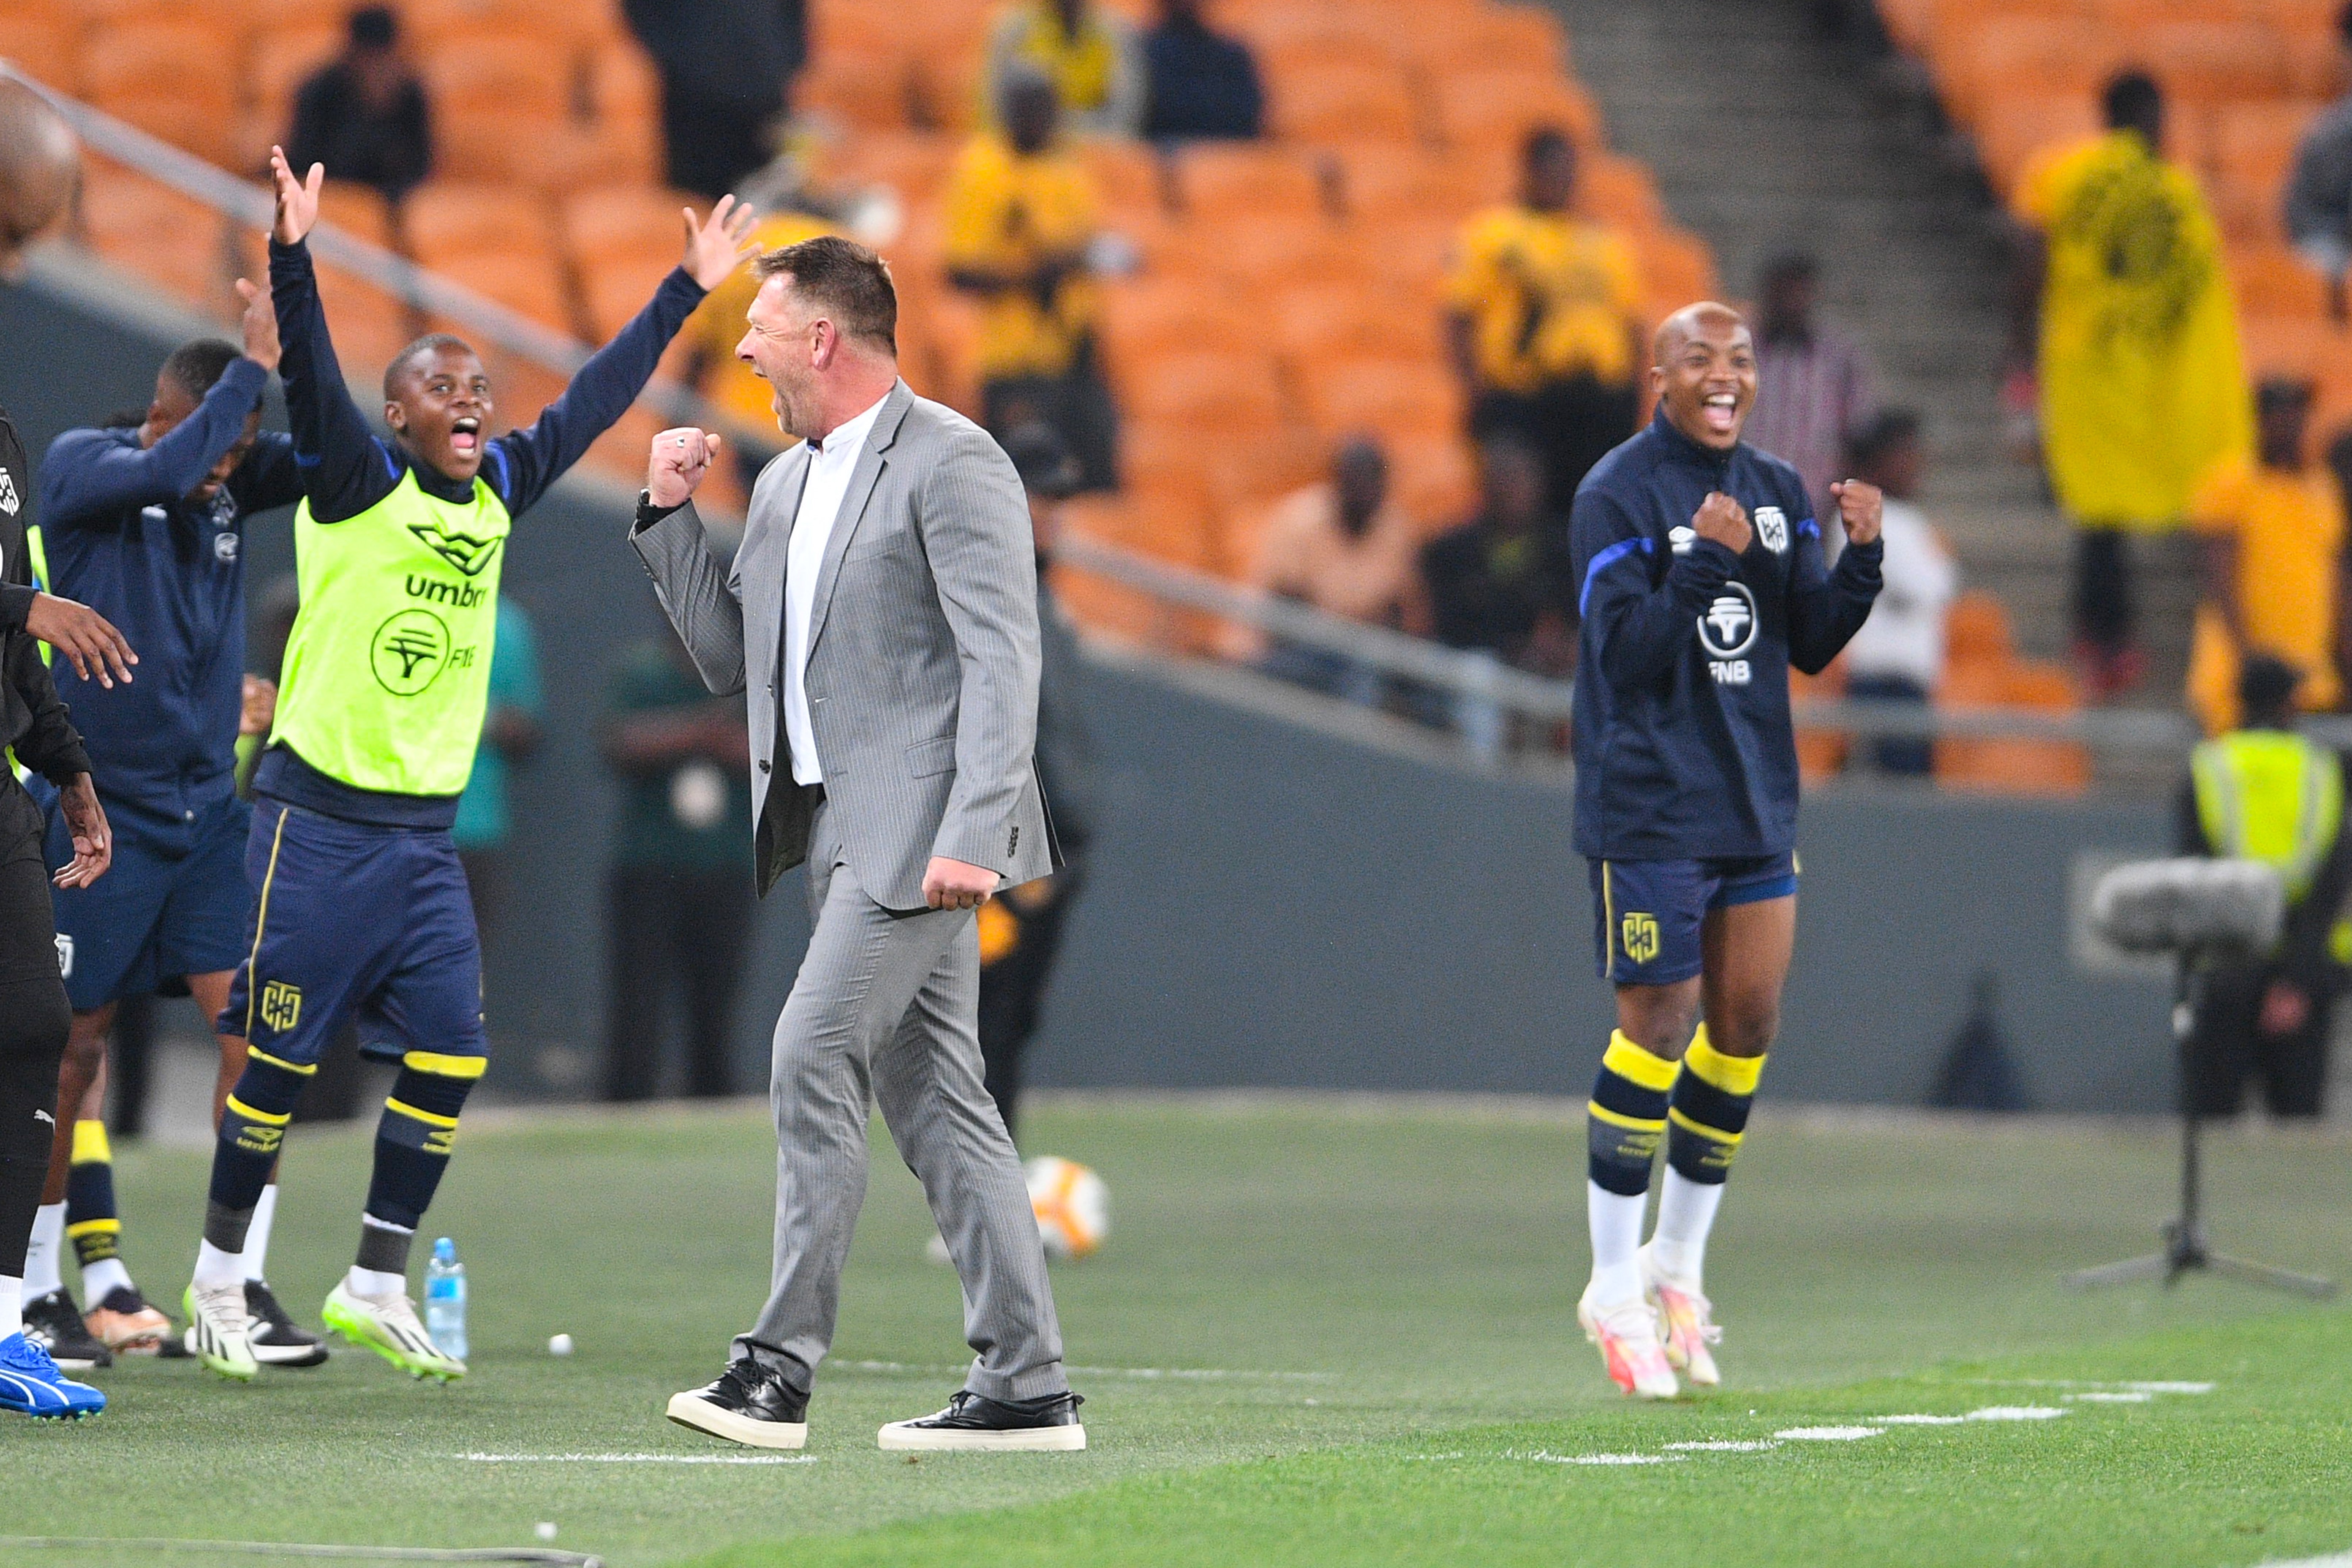 Tinkler gets another chance to audition for Chiefs job?